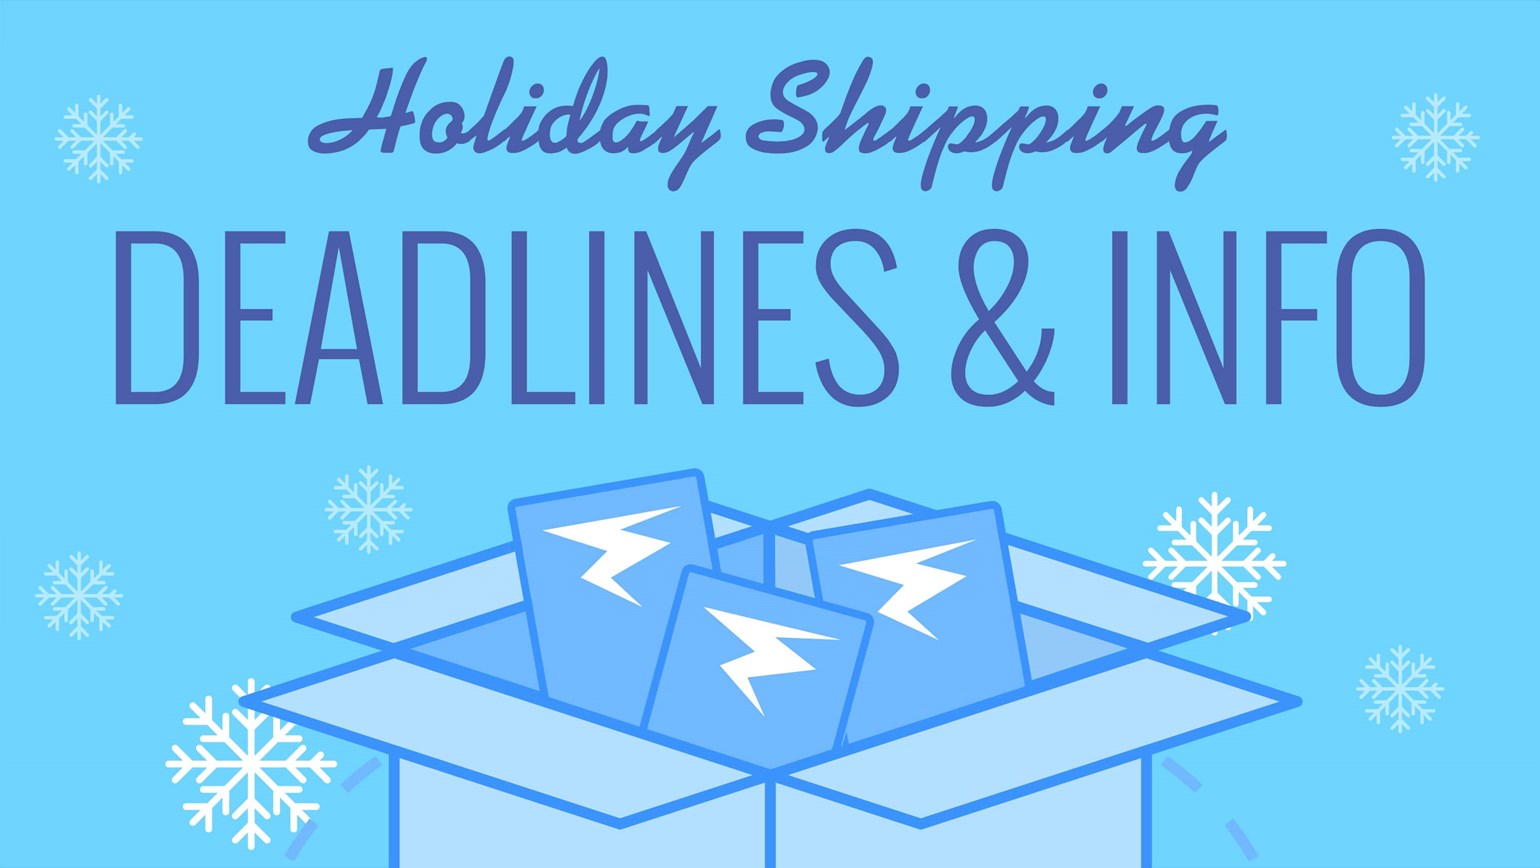 Key Holiday Shipping Deadlines & Info